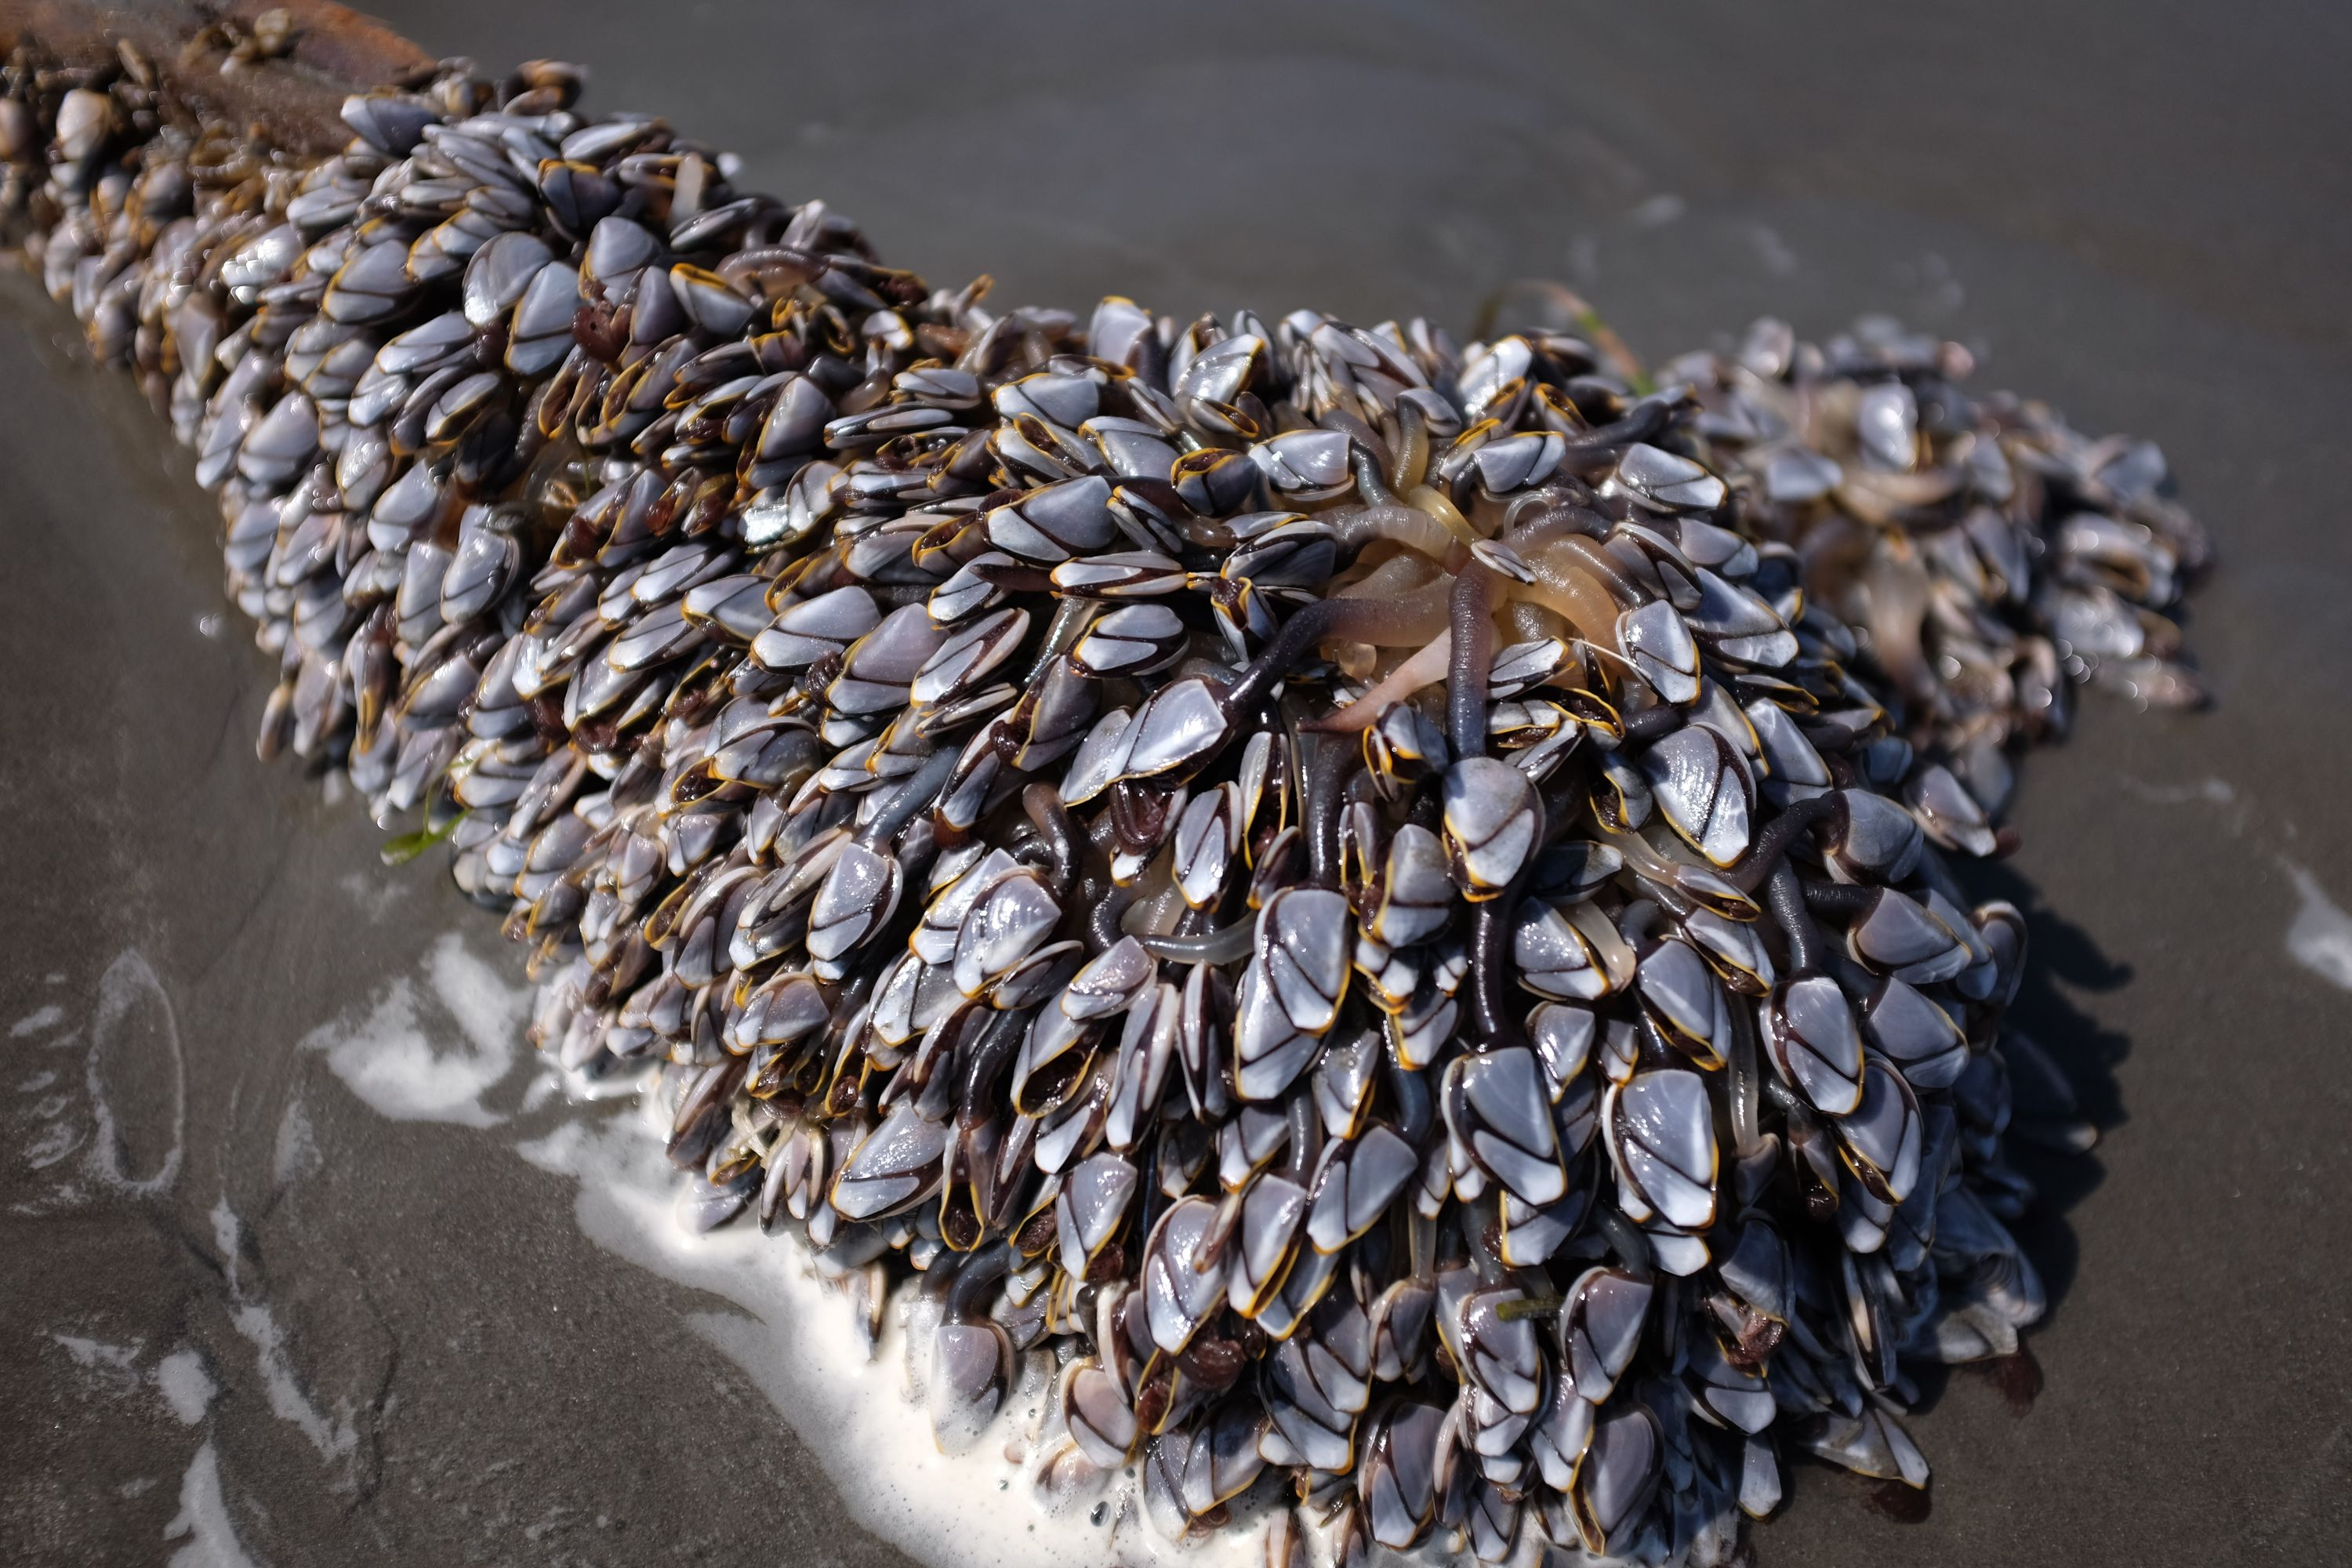 Hundreds of clams in a cluster on the beach.